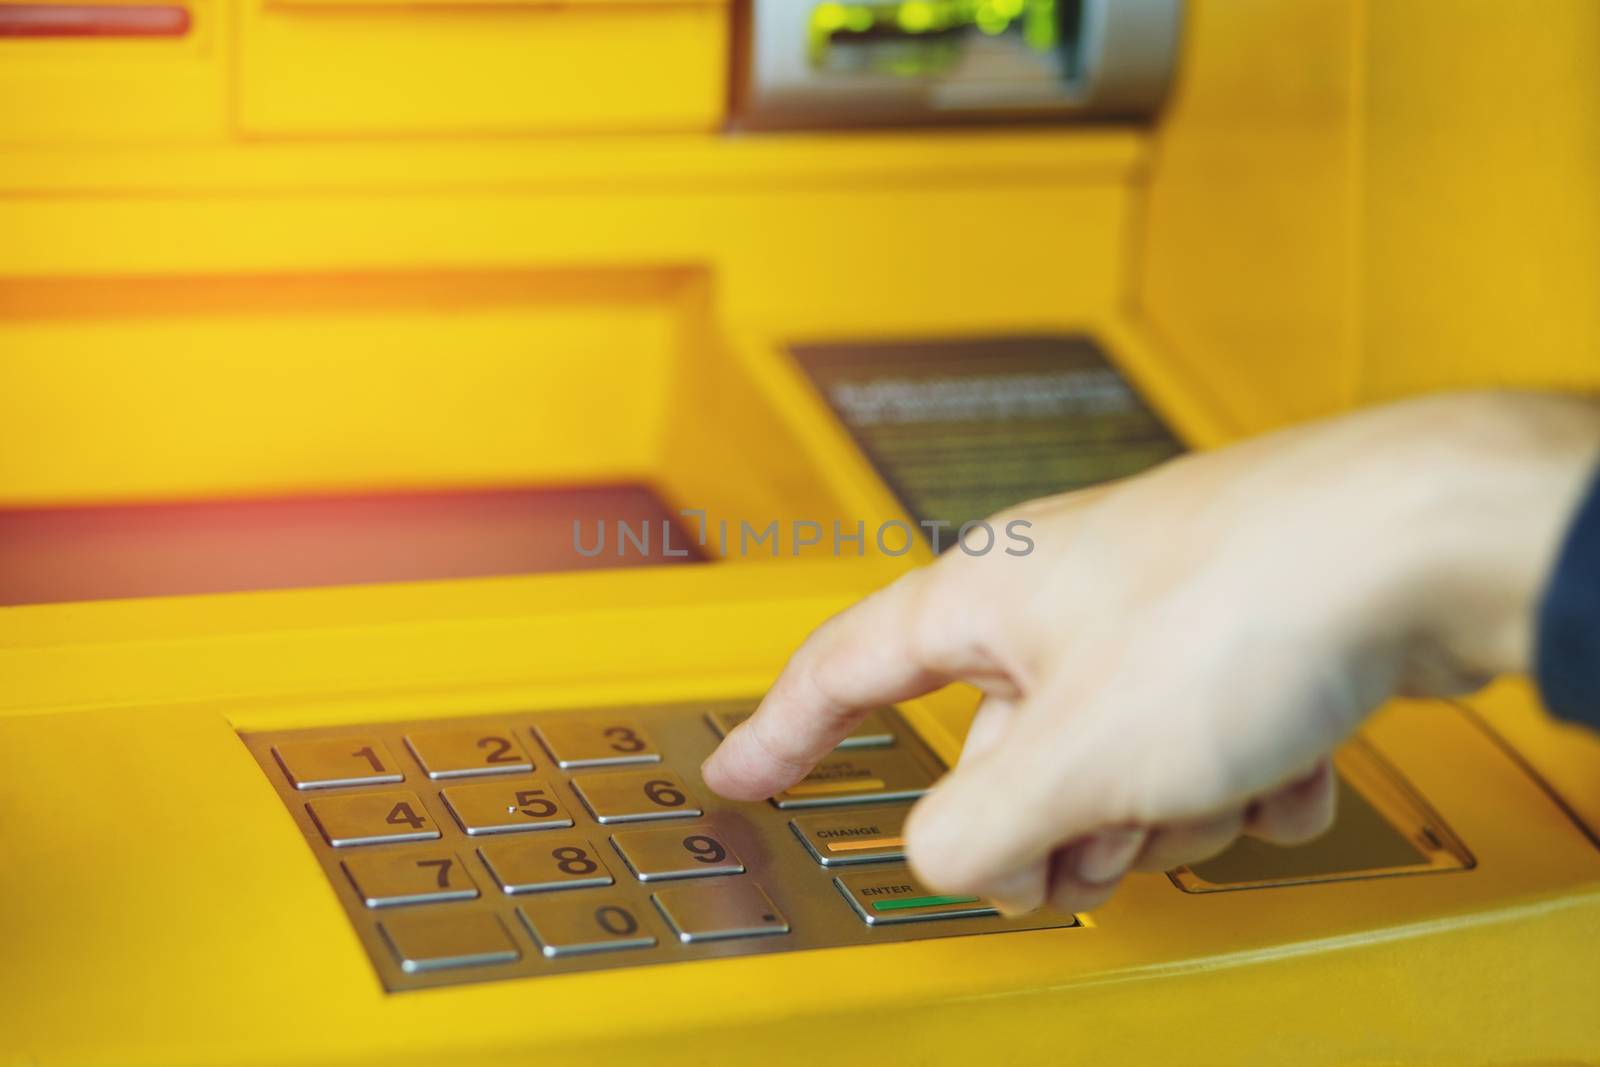 Press the money the password. ATM machine Put your hands off protect Secret code password withdraw.